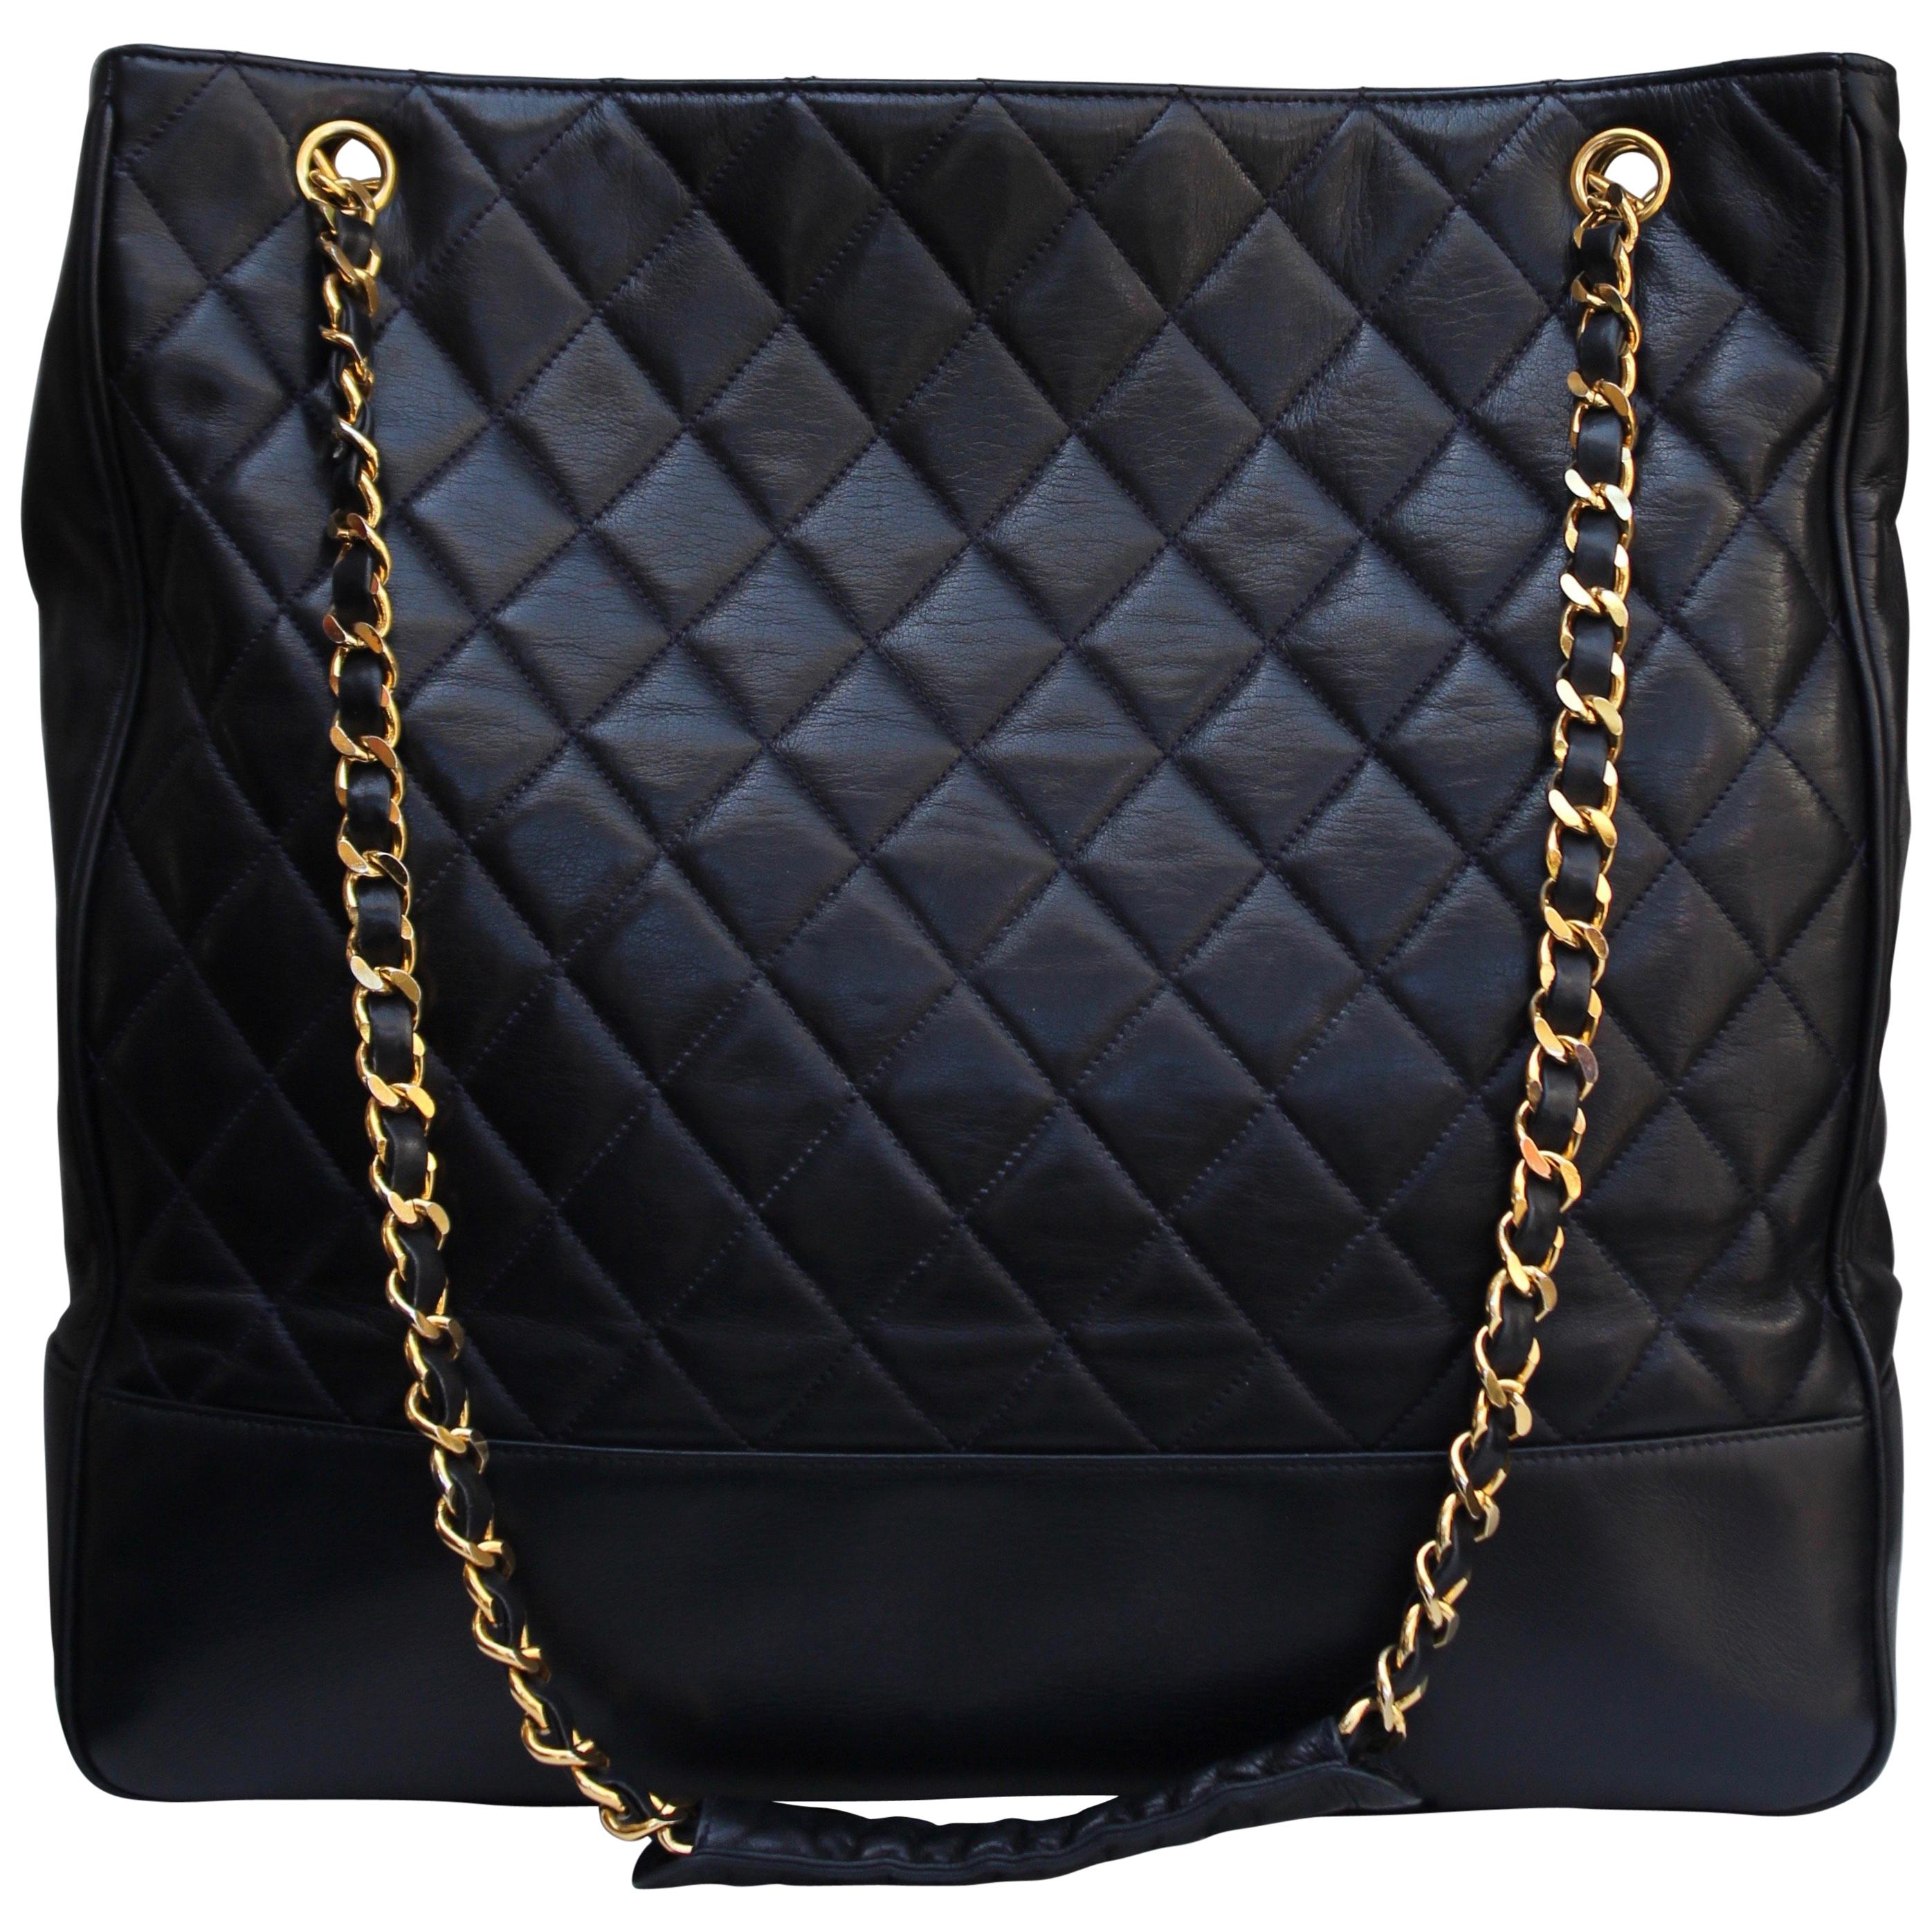 Chanel large black quilted leather bag, 1990’s